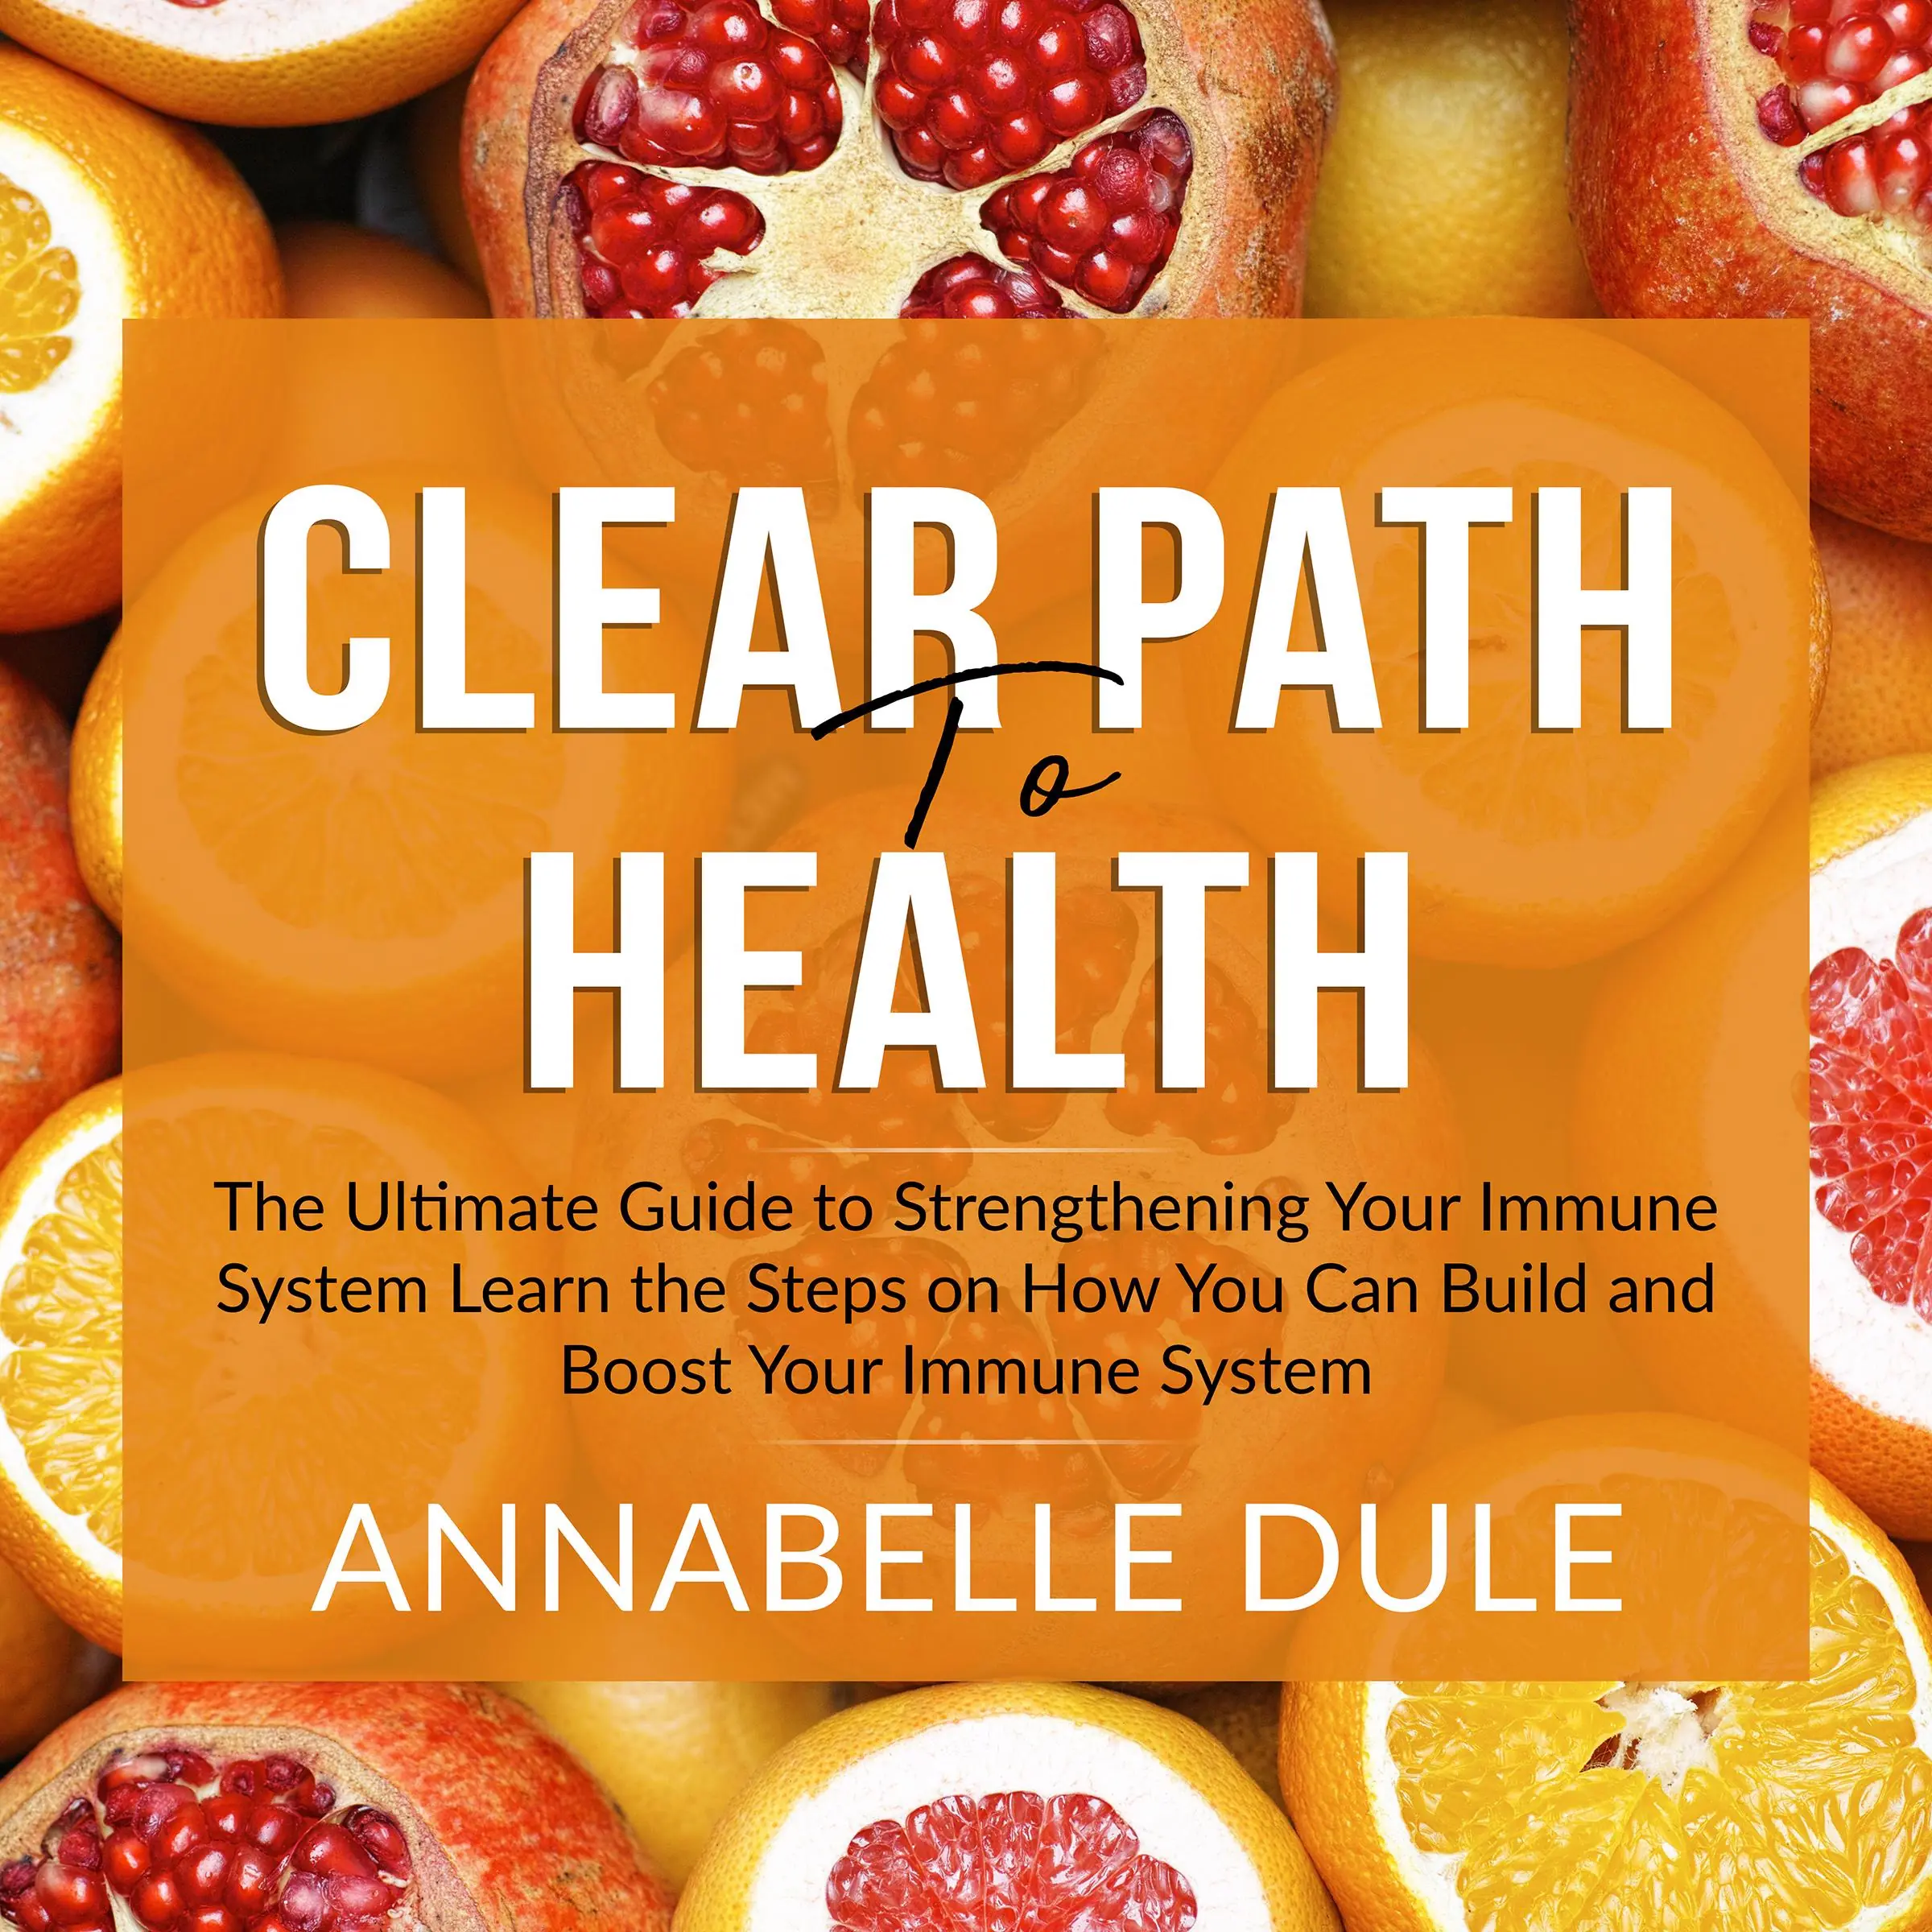 Clear Path To Health: The Ultimate Guide to Strengthening Your Immune System Learn the Steps on How You Can Build and Boost Your Immune System Audiobook by Annabelle Dule